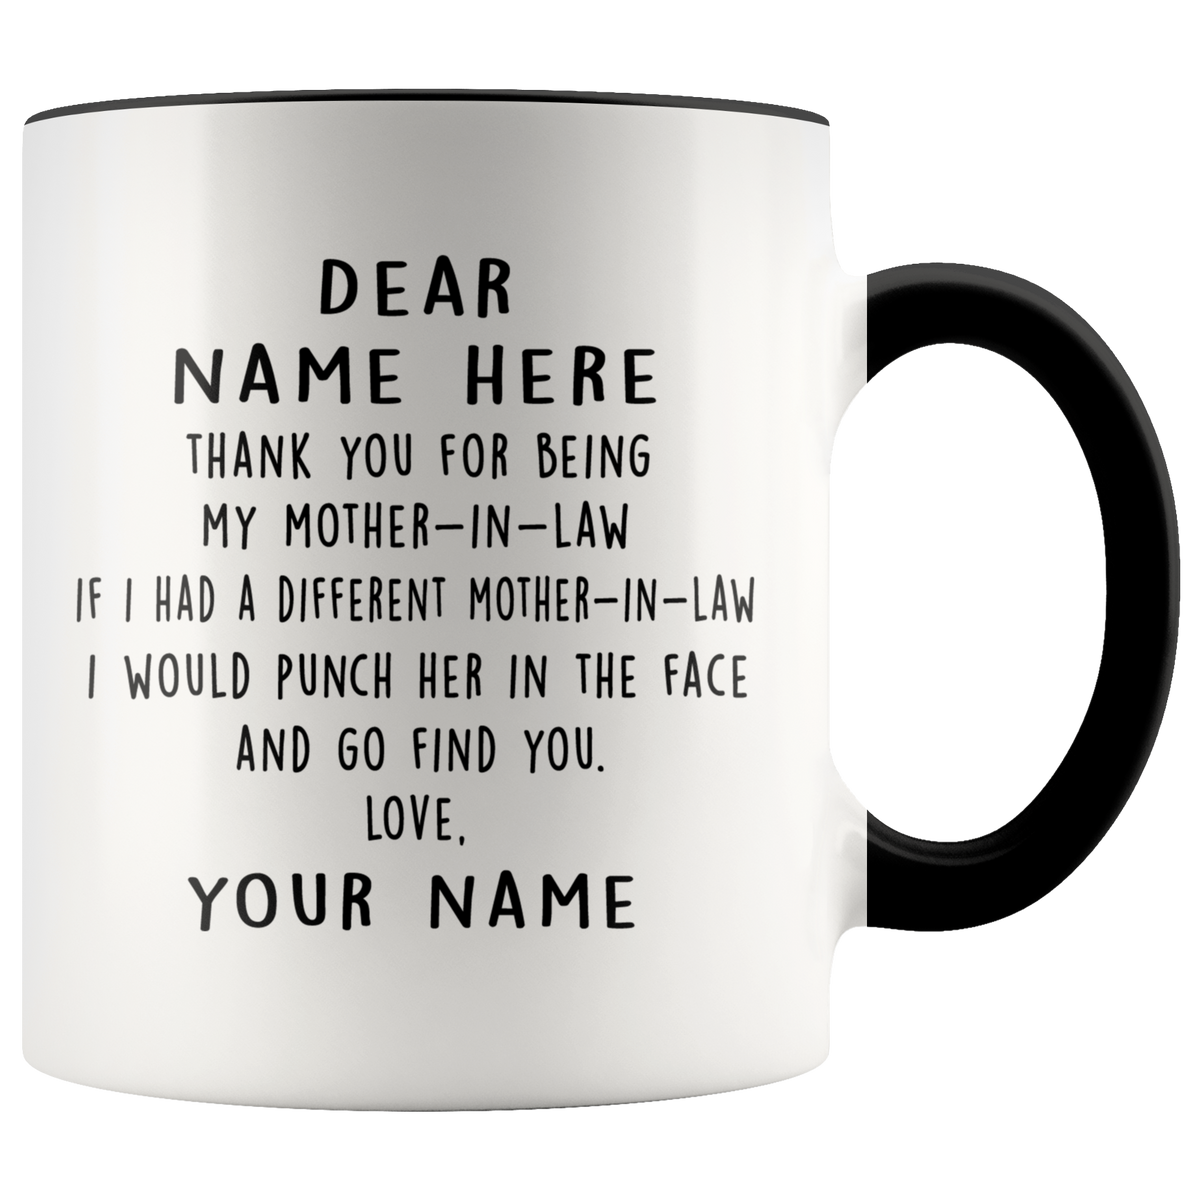 Personalized Mug Gift For Mother In Law - If I Had A Different Mother In Law Mug, Mother In Law Birthday Christmas Appreciation Gift Ideas